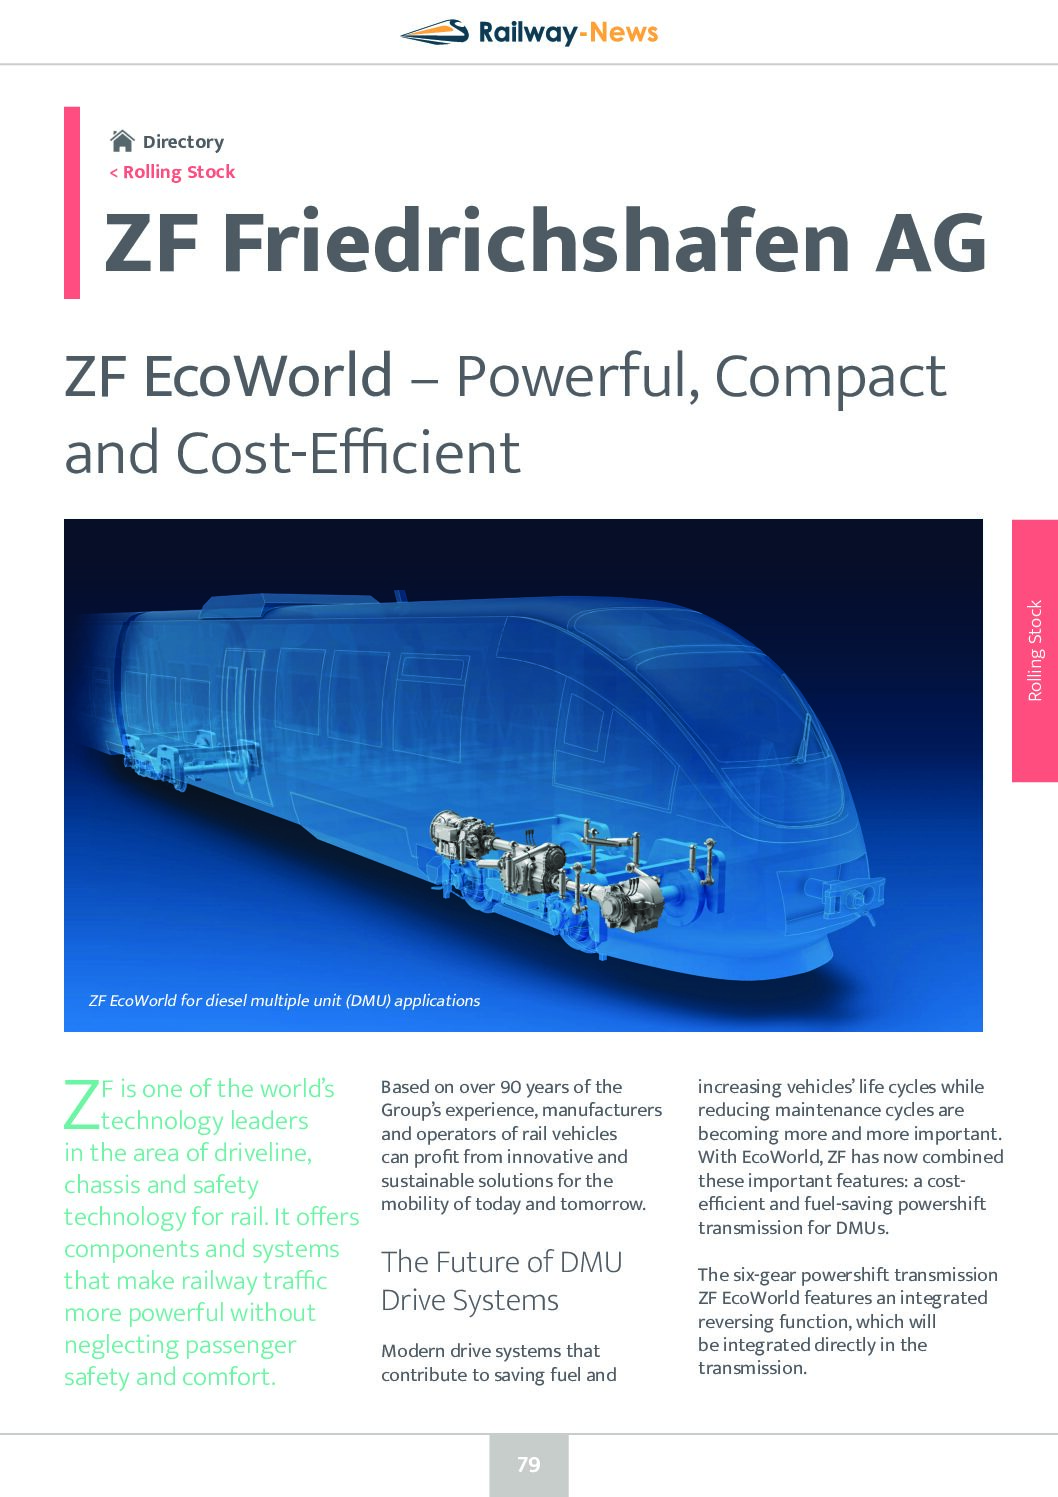 ZF EcoWorld – Powerful, Compact and Cost-Efficient